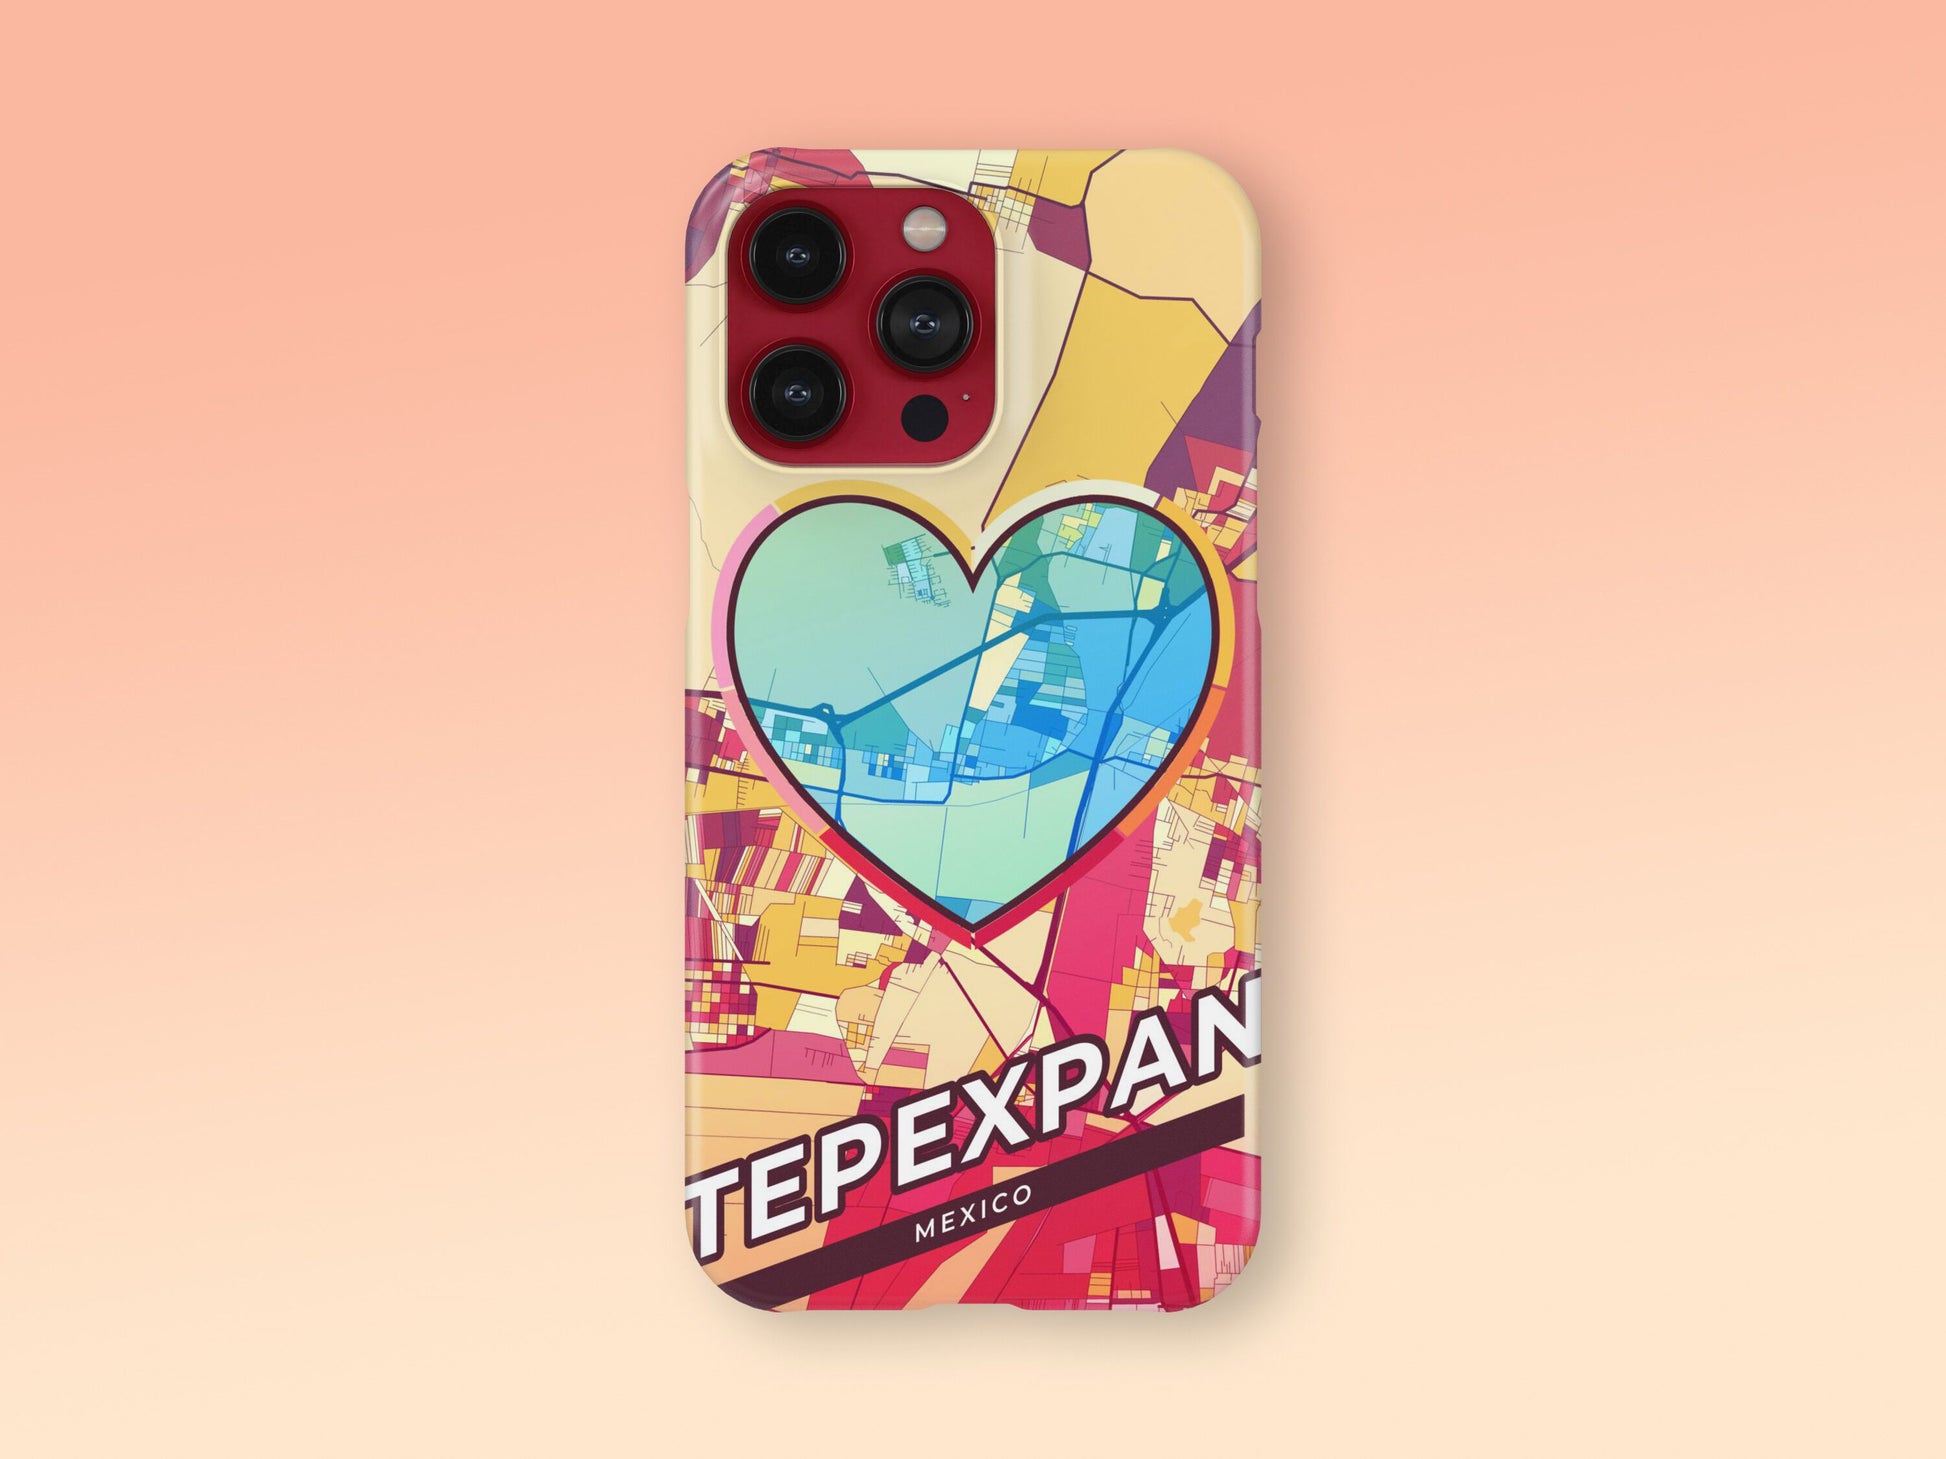 Tepexpan Mexico slim phone case with colorful icon 2